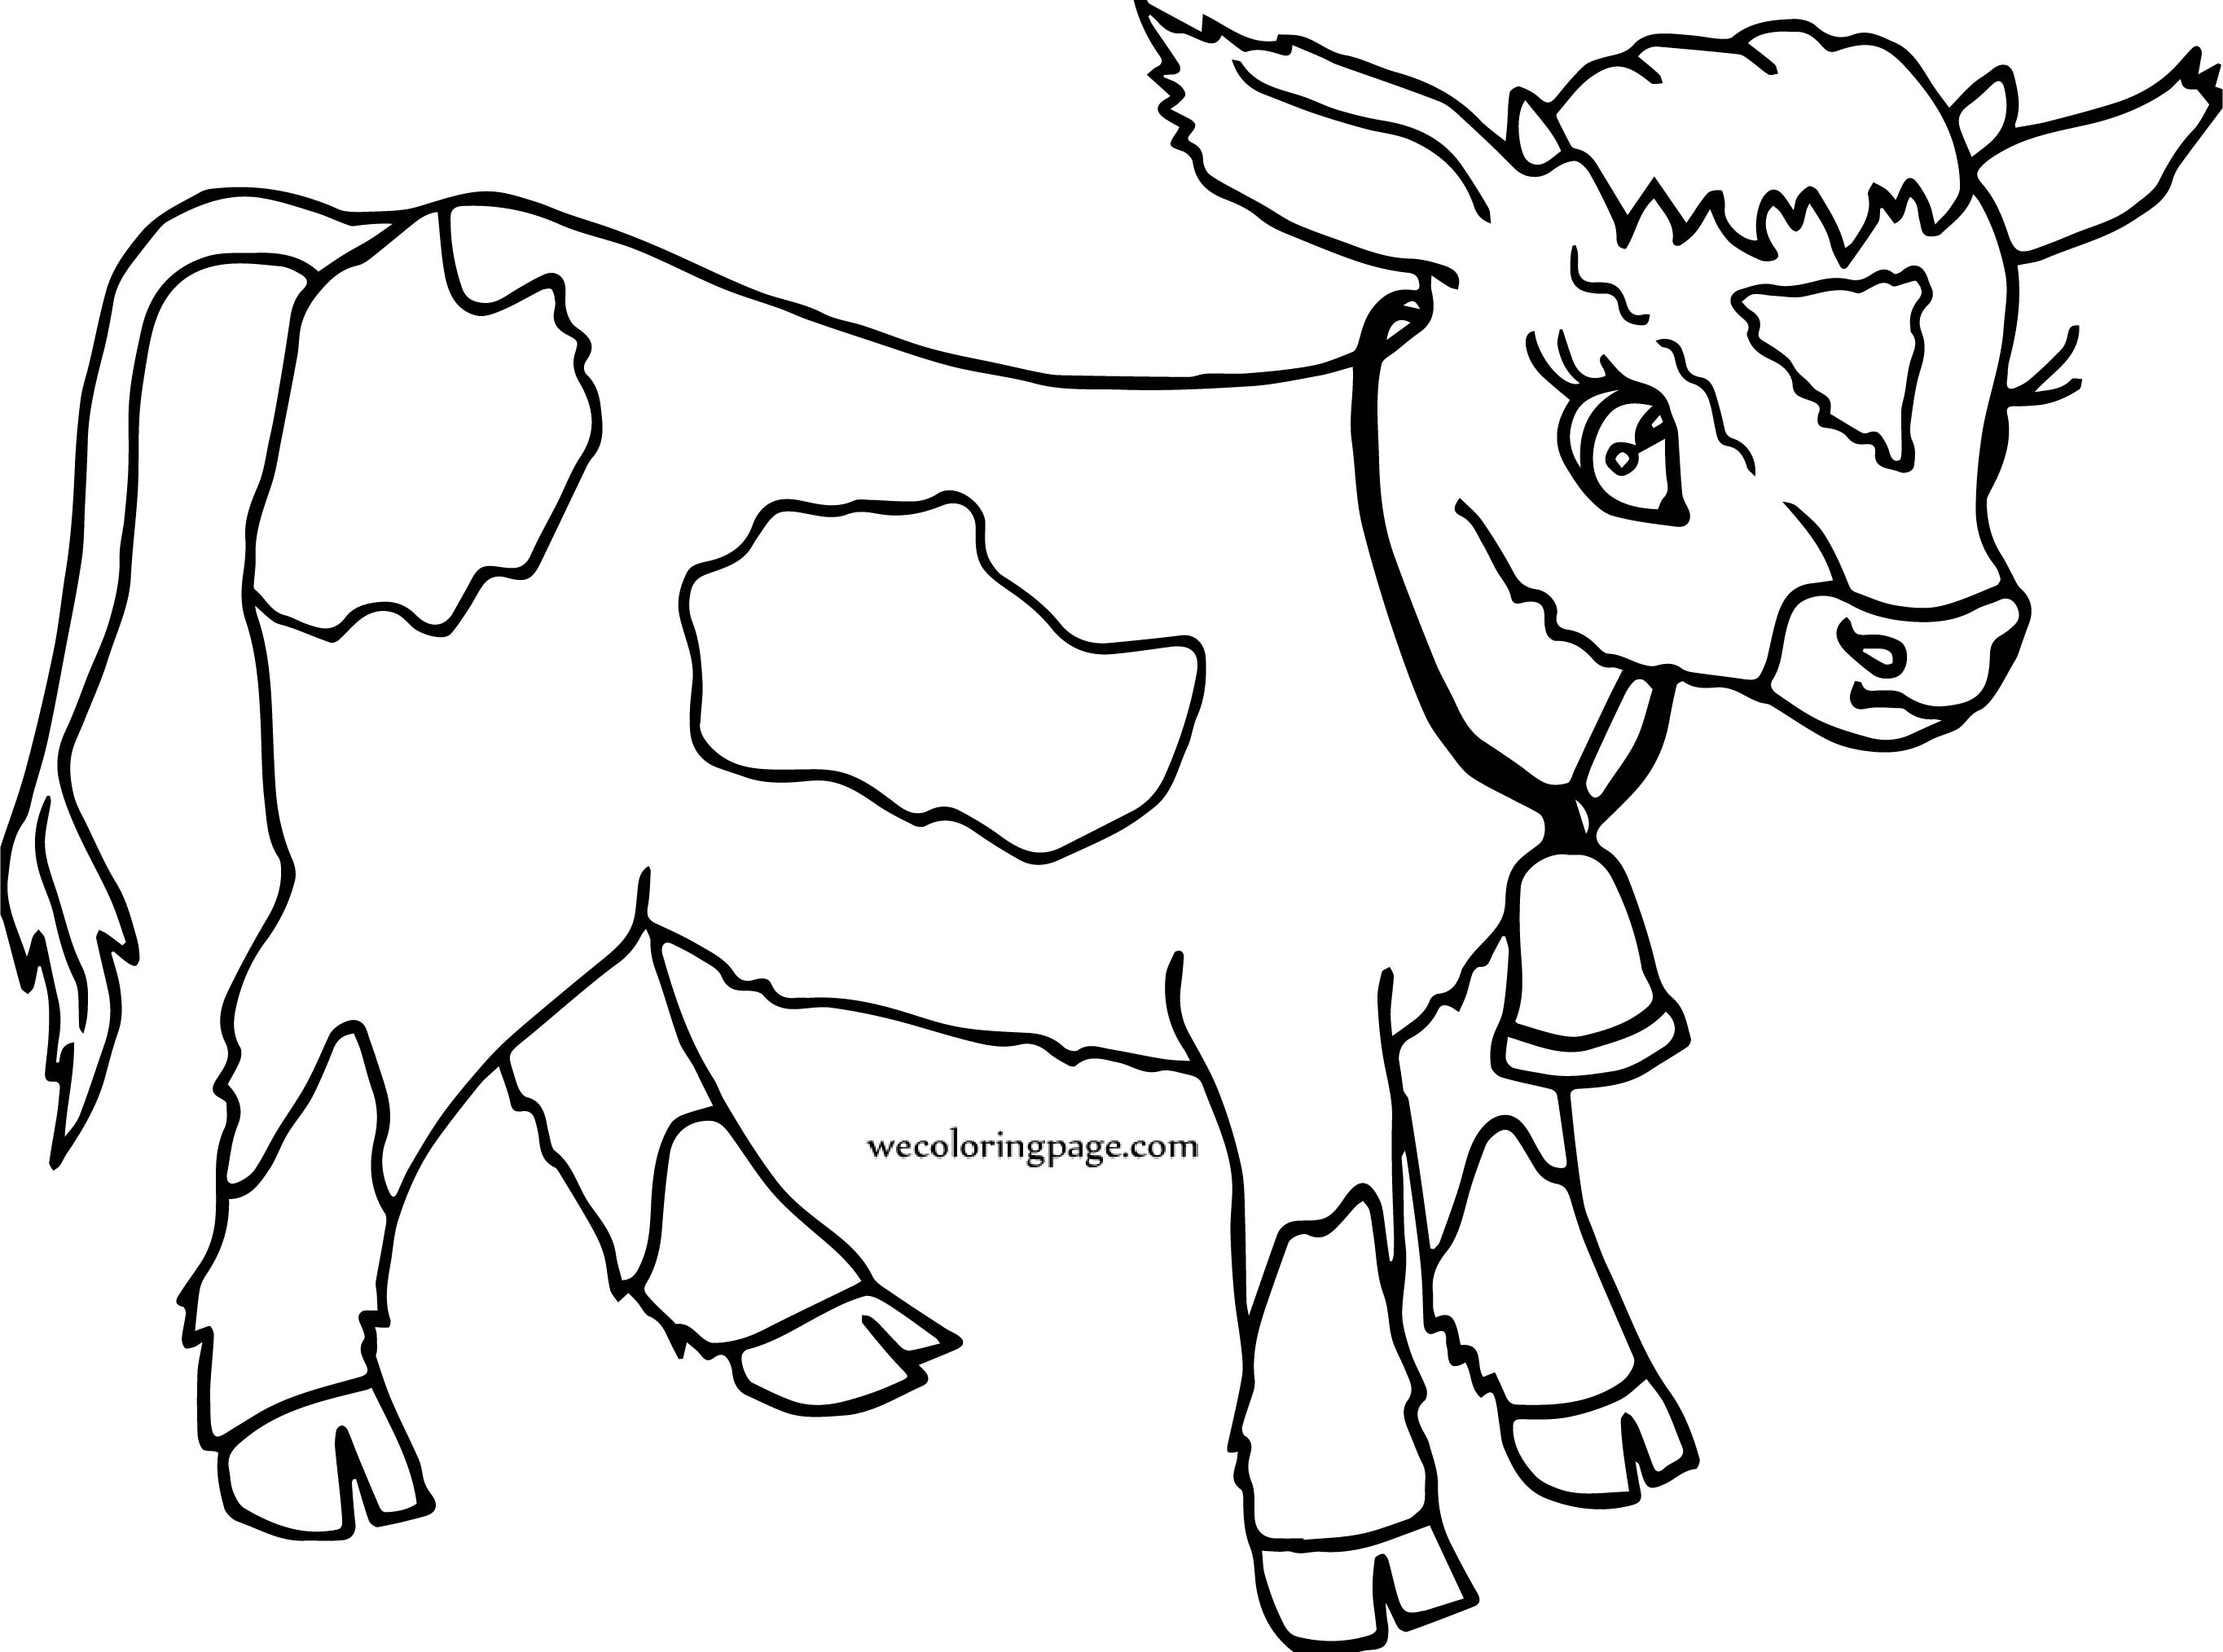 Cow And Calf Coloring Pages at GetColorings.com | Free printable